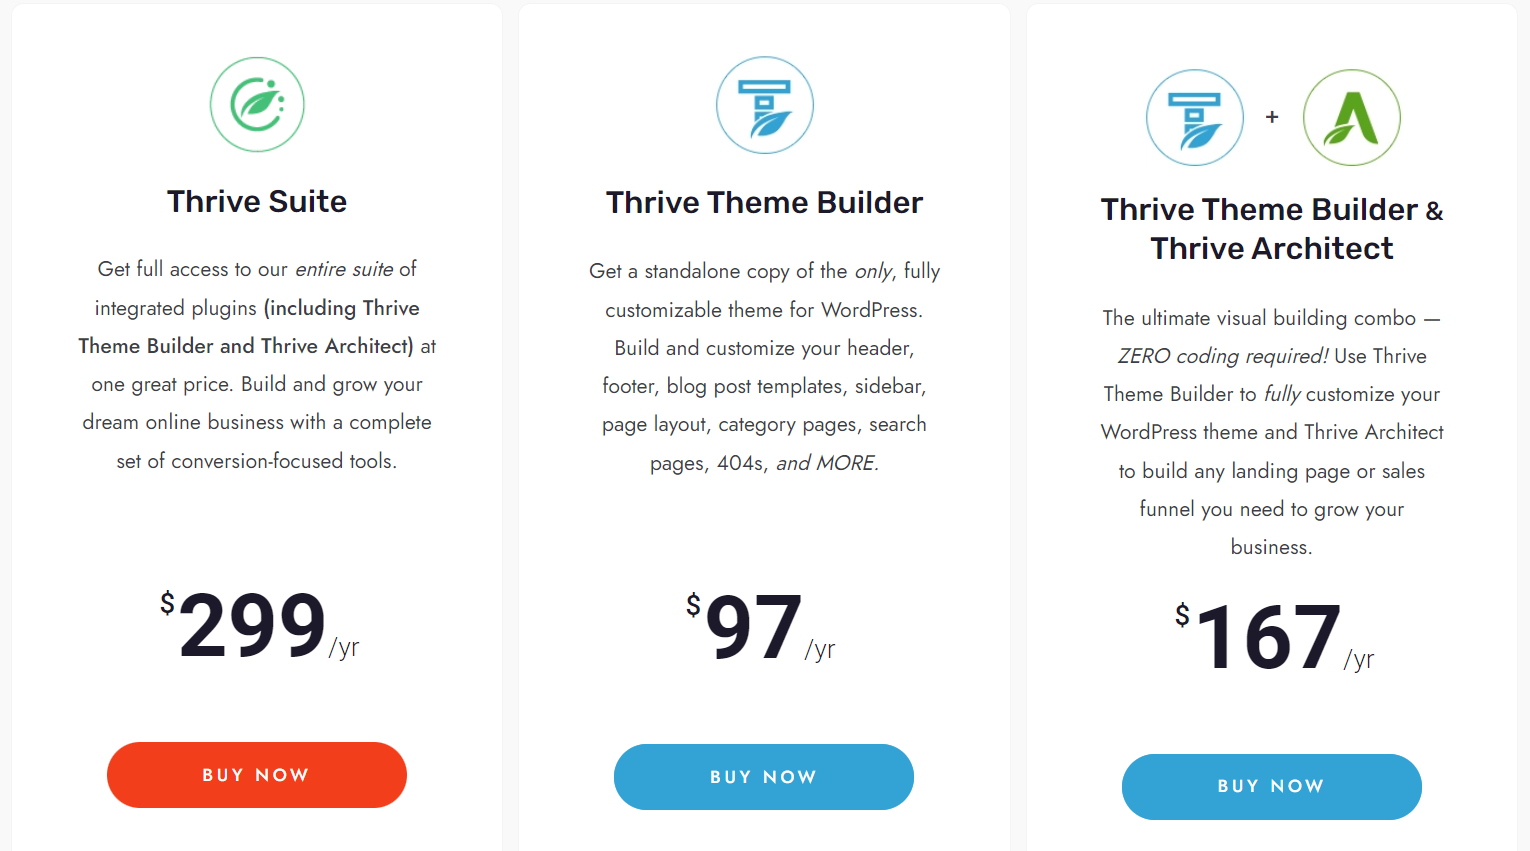 thrive theme builder pricing